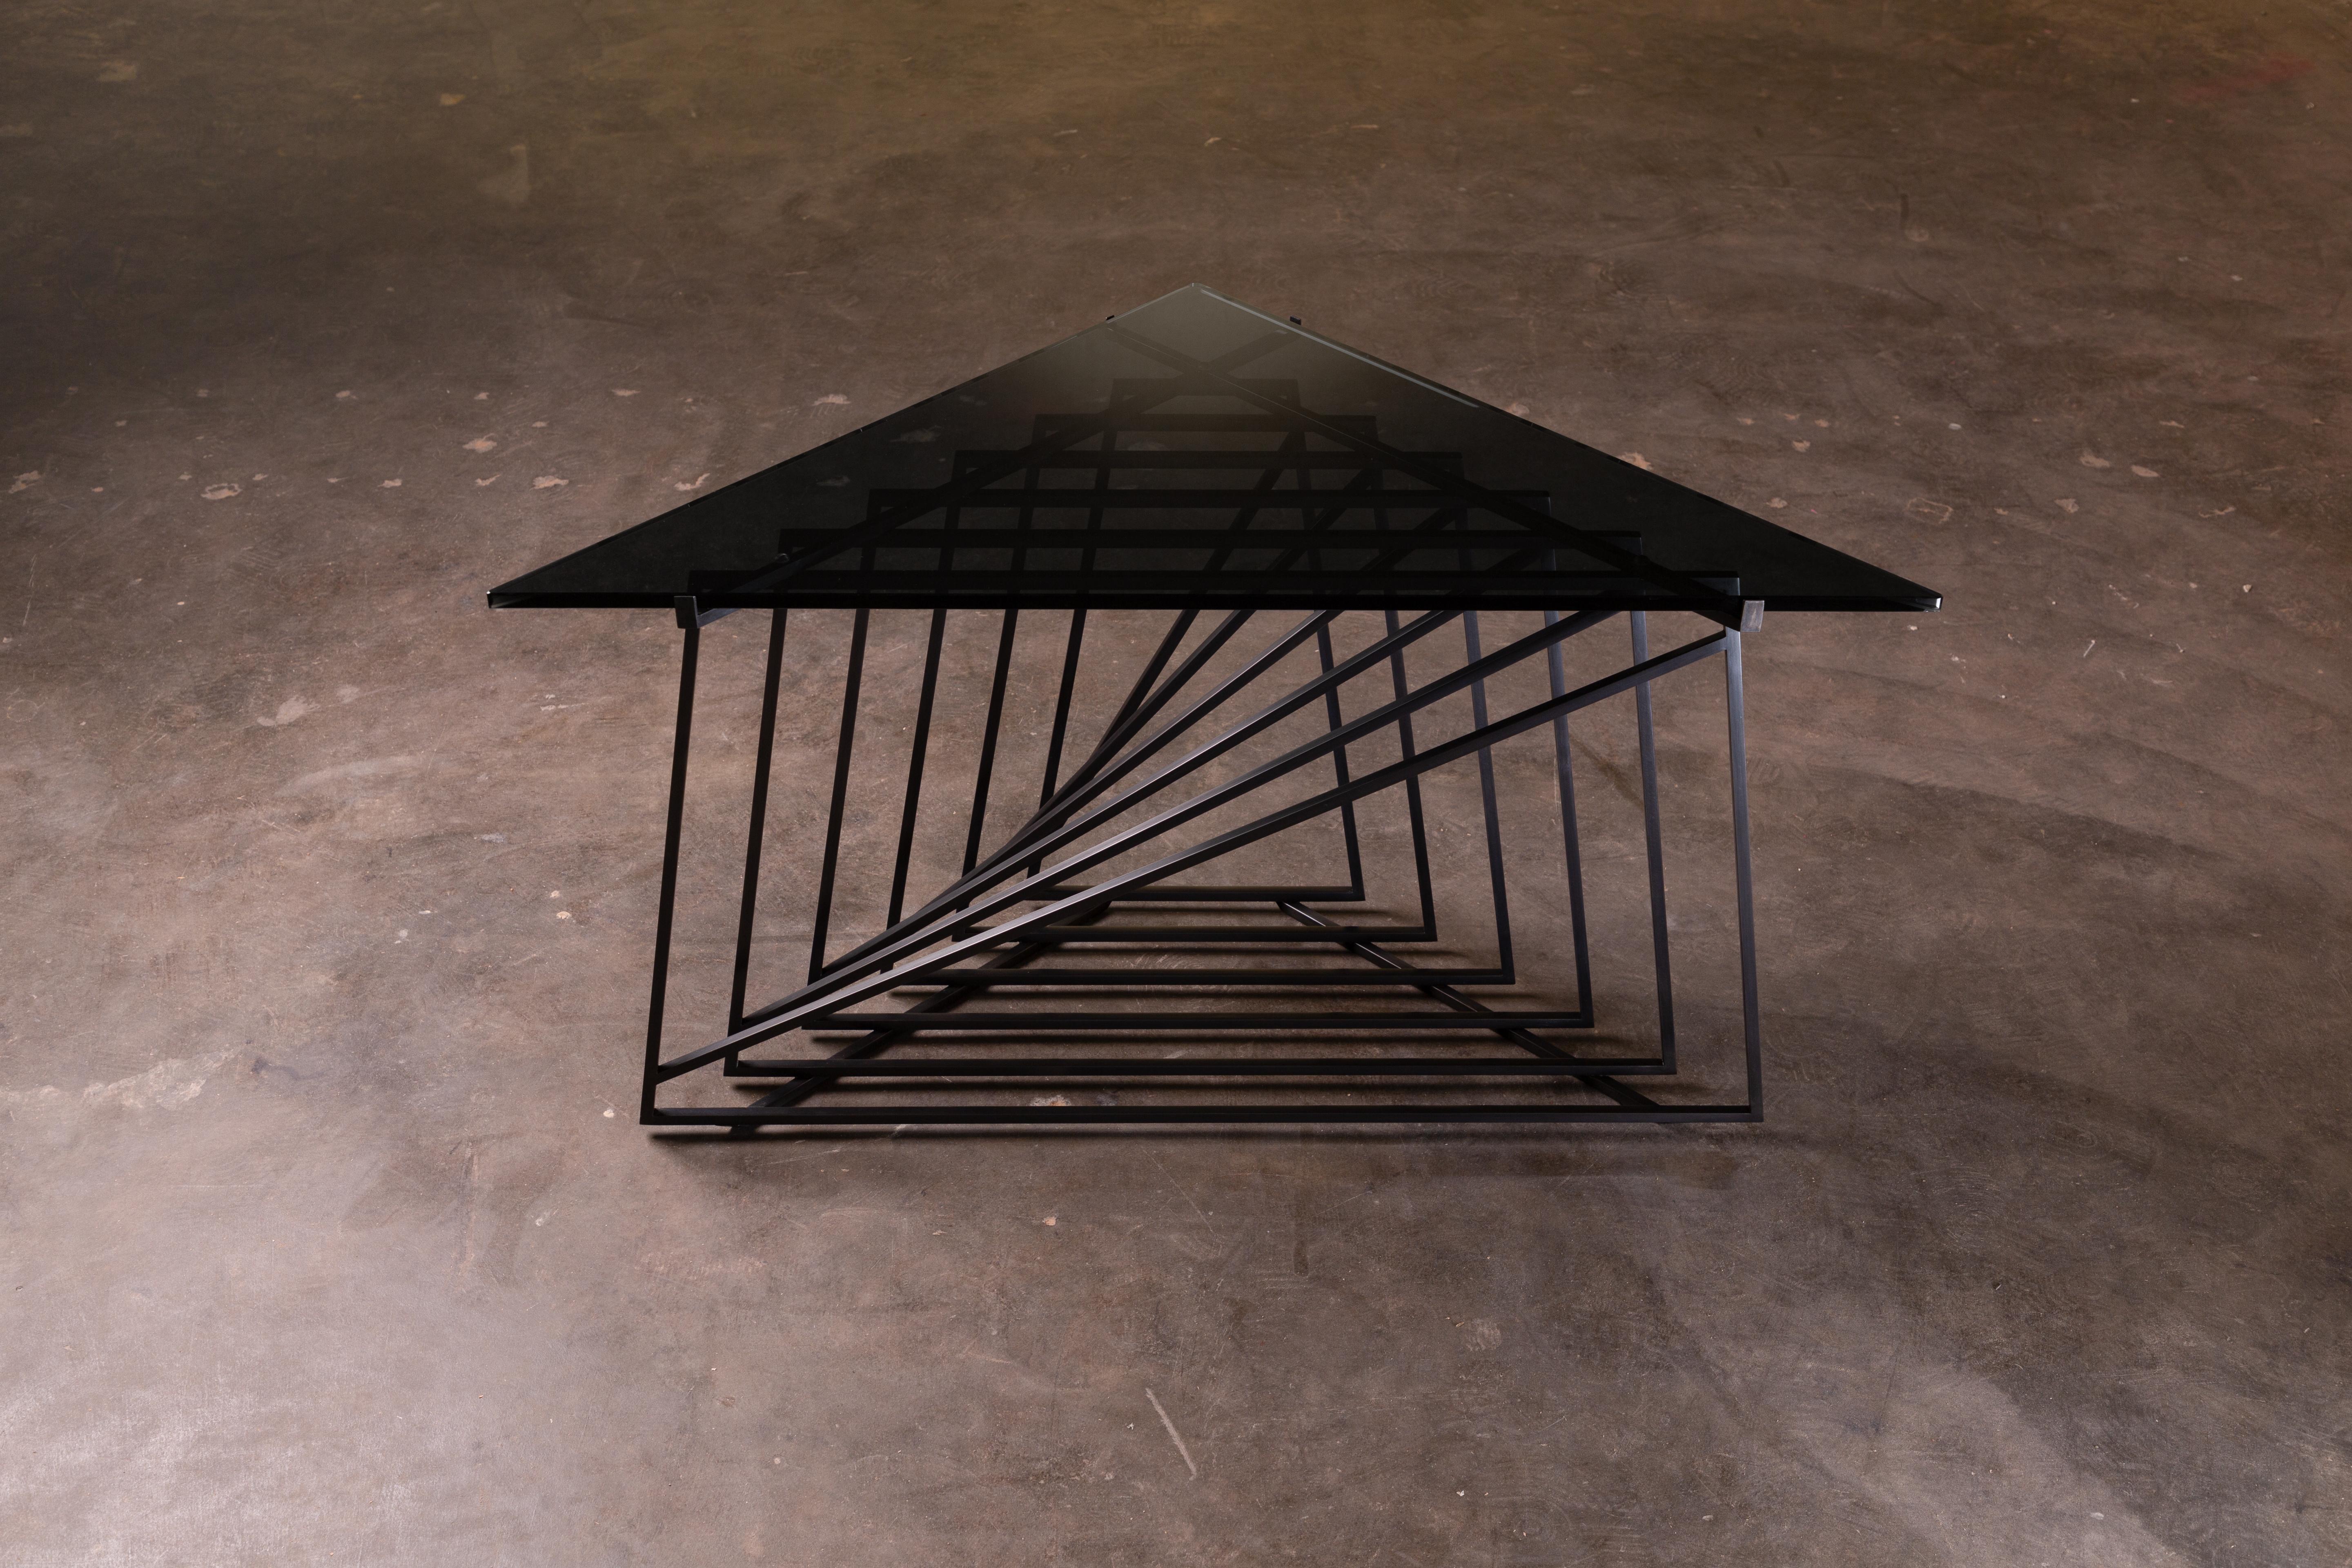 Nexus Side Tables, Trio, Blackened Steel and Smoked Glass, by Force/Collide For Sale 1